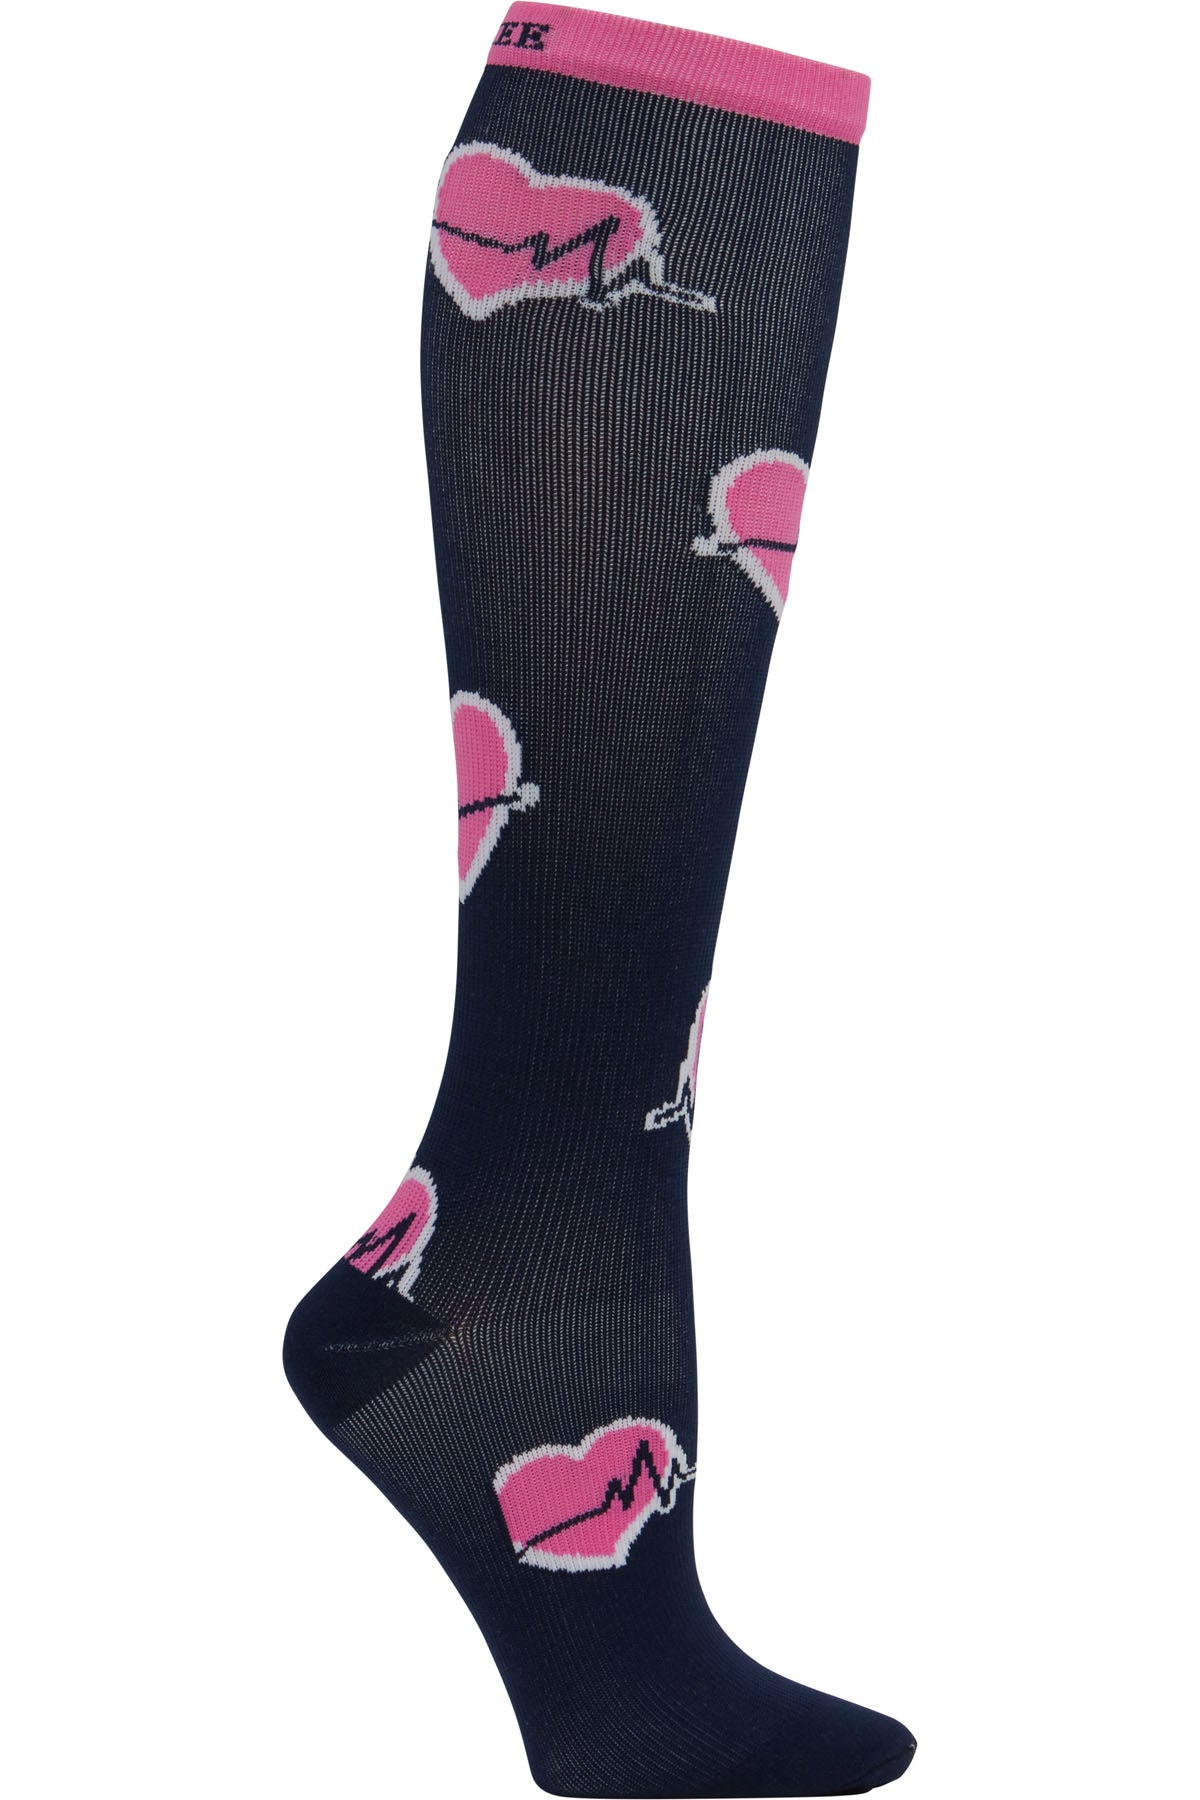 Cherokee Plus Print Support Mild Compression Socks Wide Calf 8-12 mmHg Trauma Queen at Parker's Clothing and Shoes.